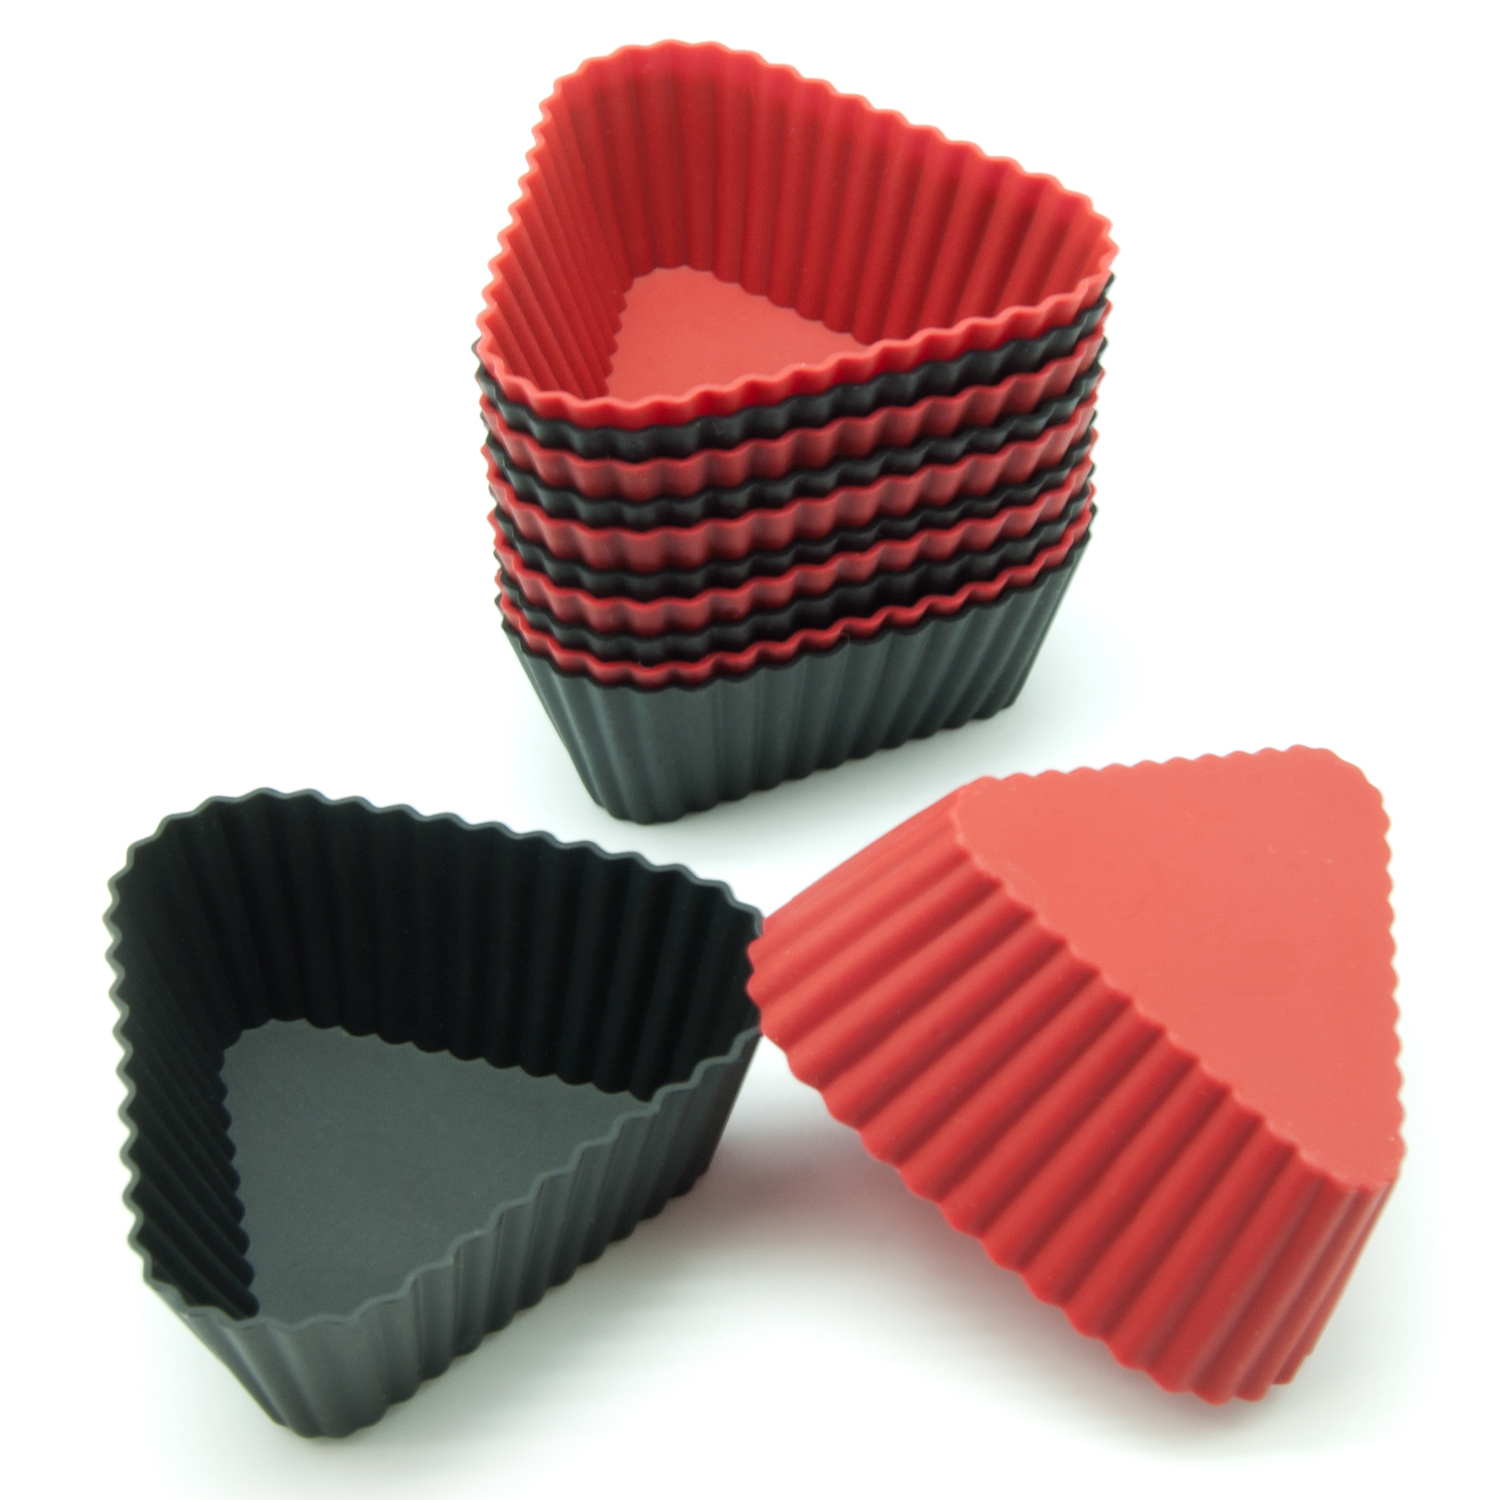 Freshware Silicone Cupcake Liners / Baking Cups - 12-Pack Muffin Molds, 2-6/8 inch Triangle, Red and Black Colors